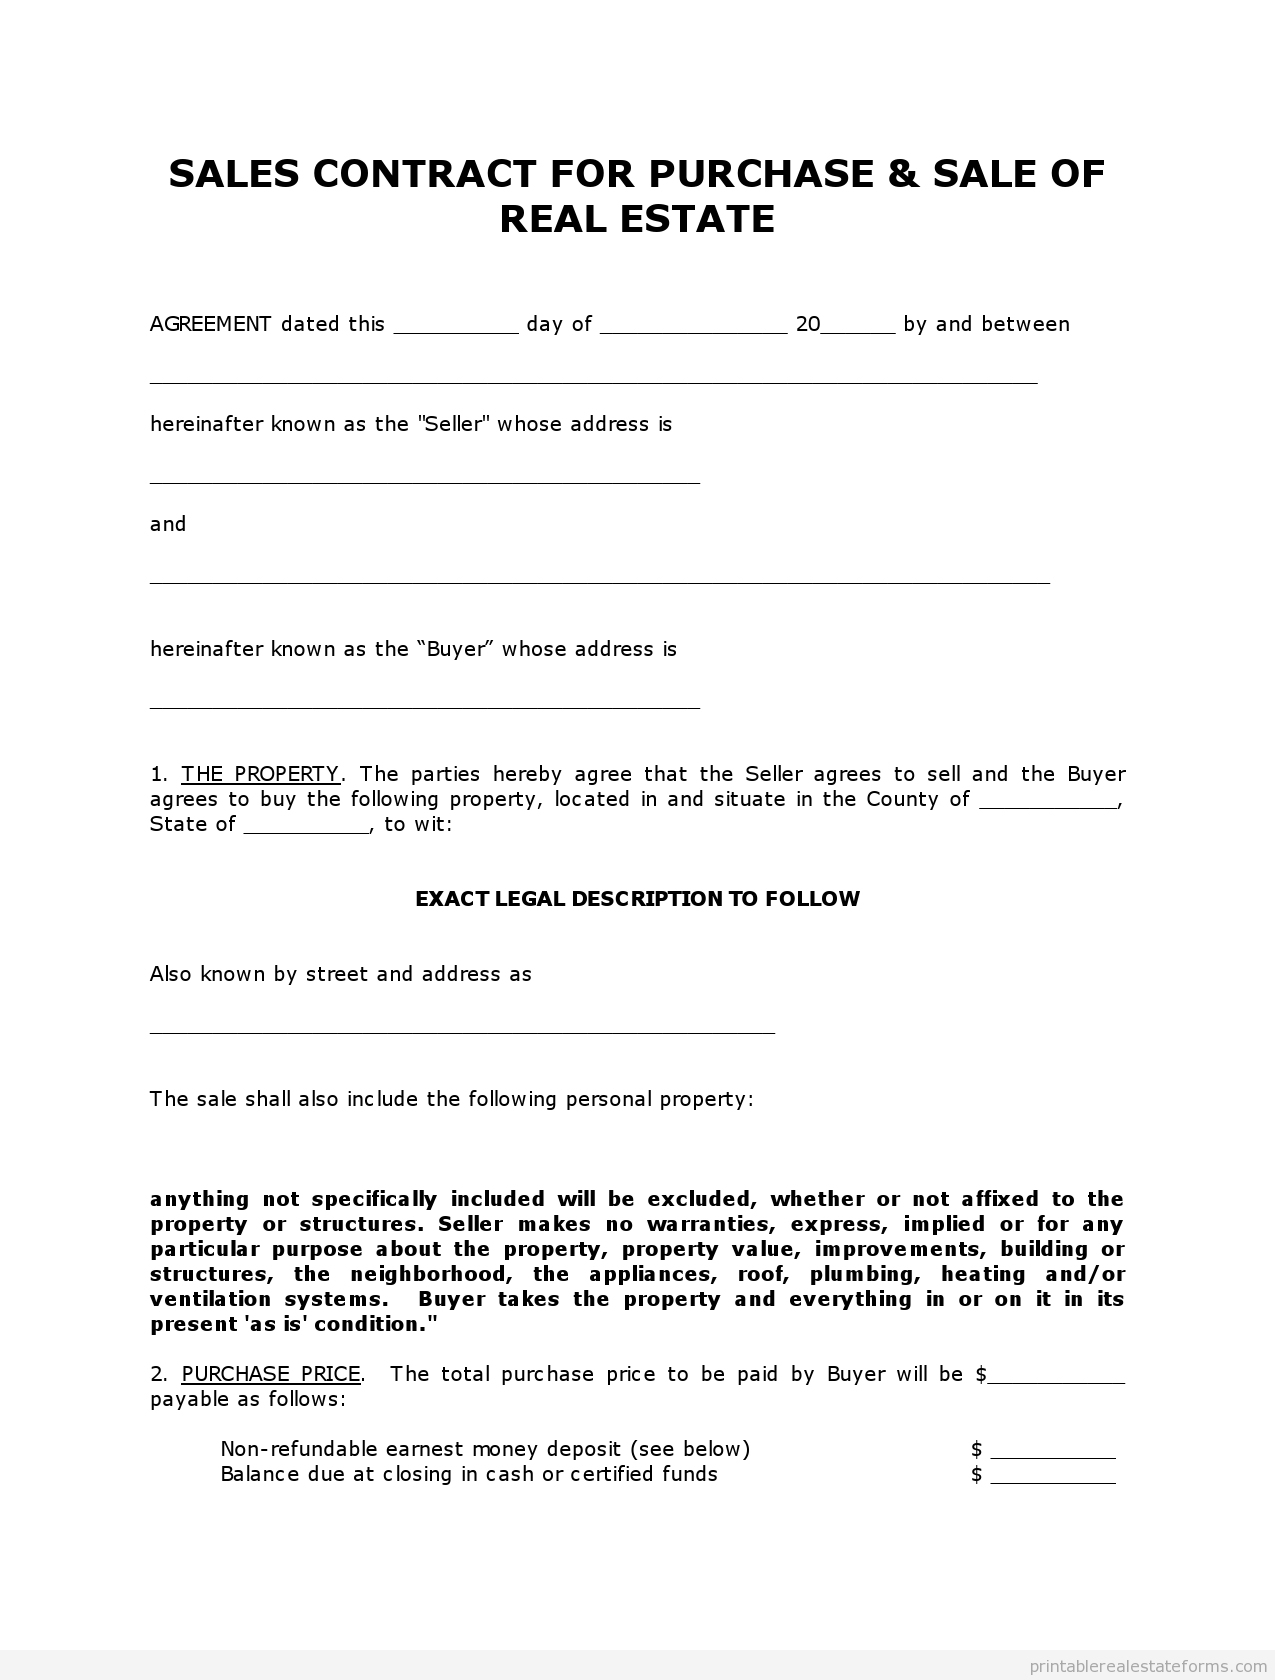 Simple Home Purchase Agreement Sale Agreement For House Purchase 86667 Get High Quality Printable